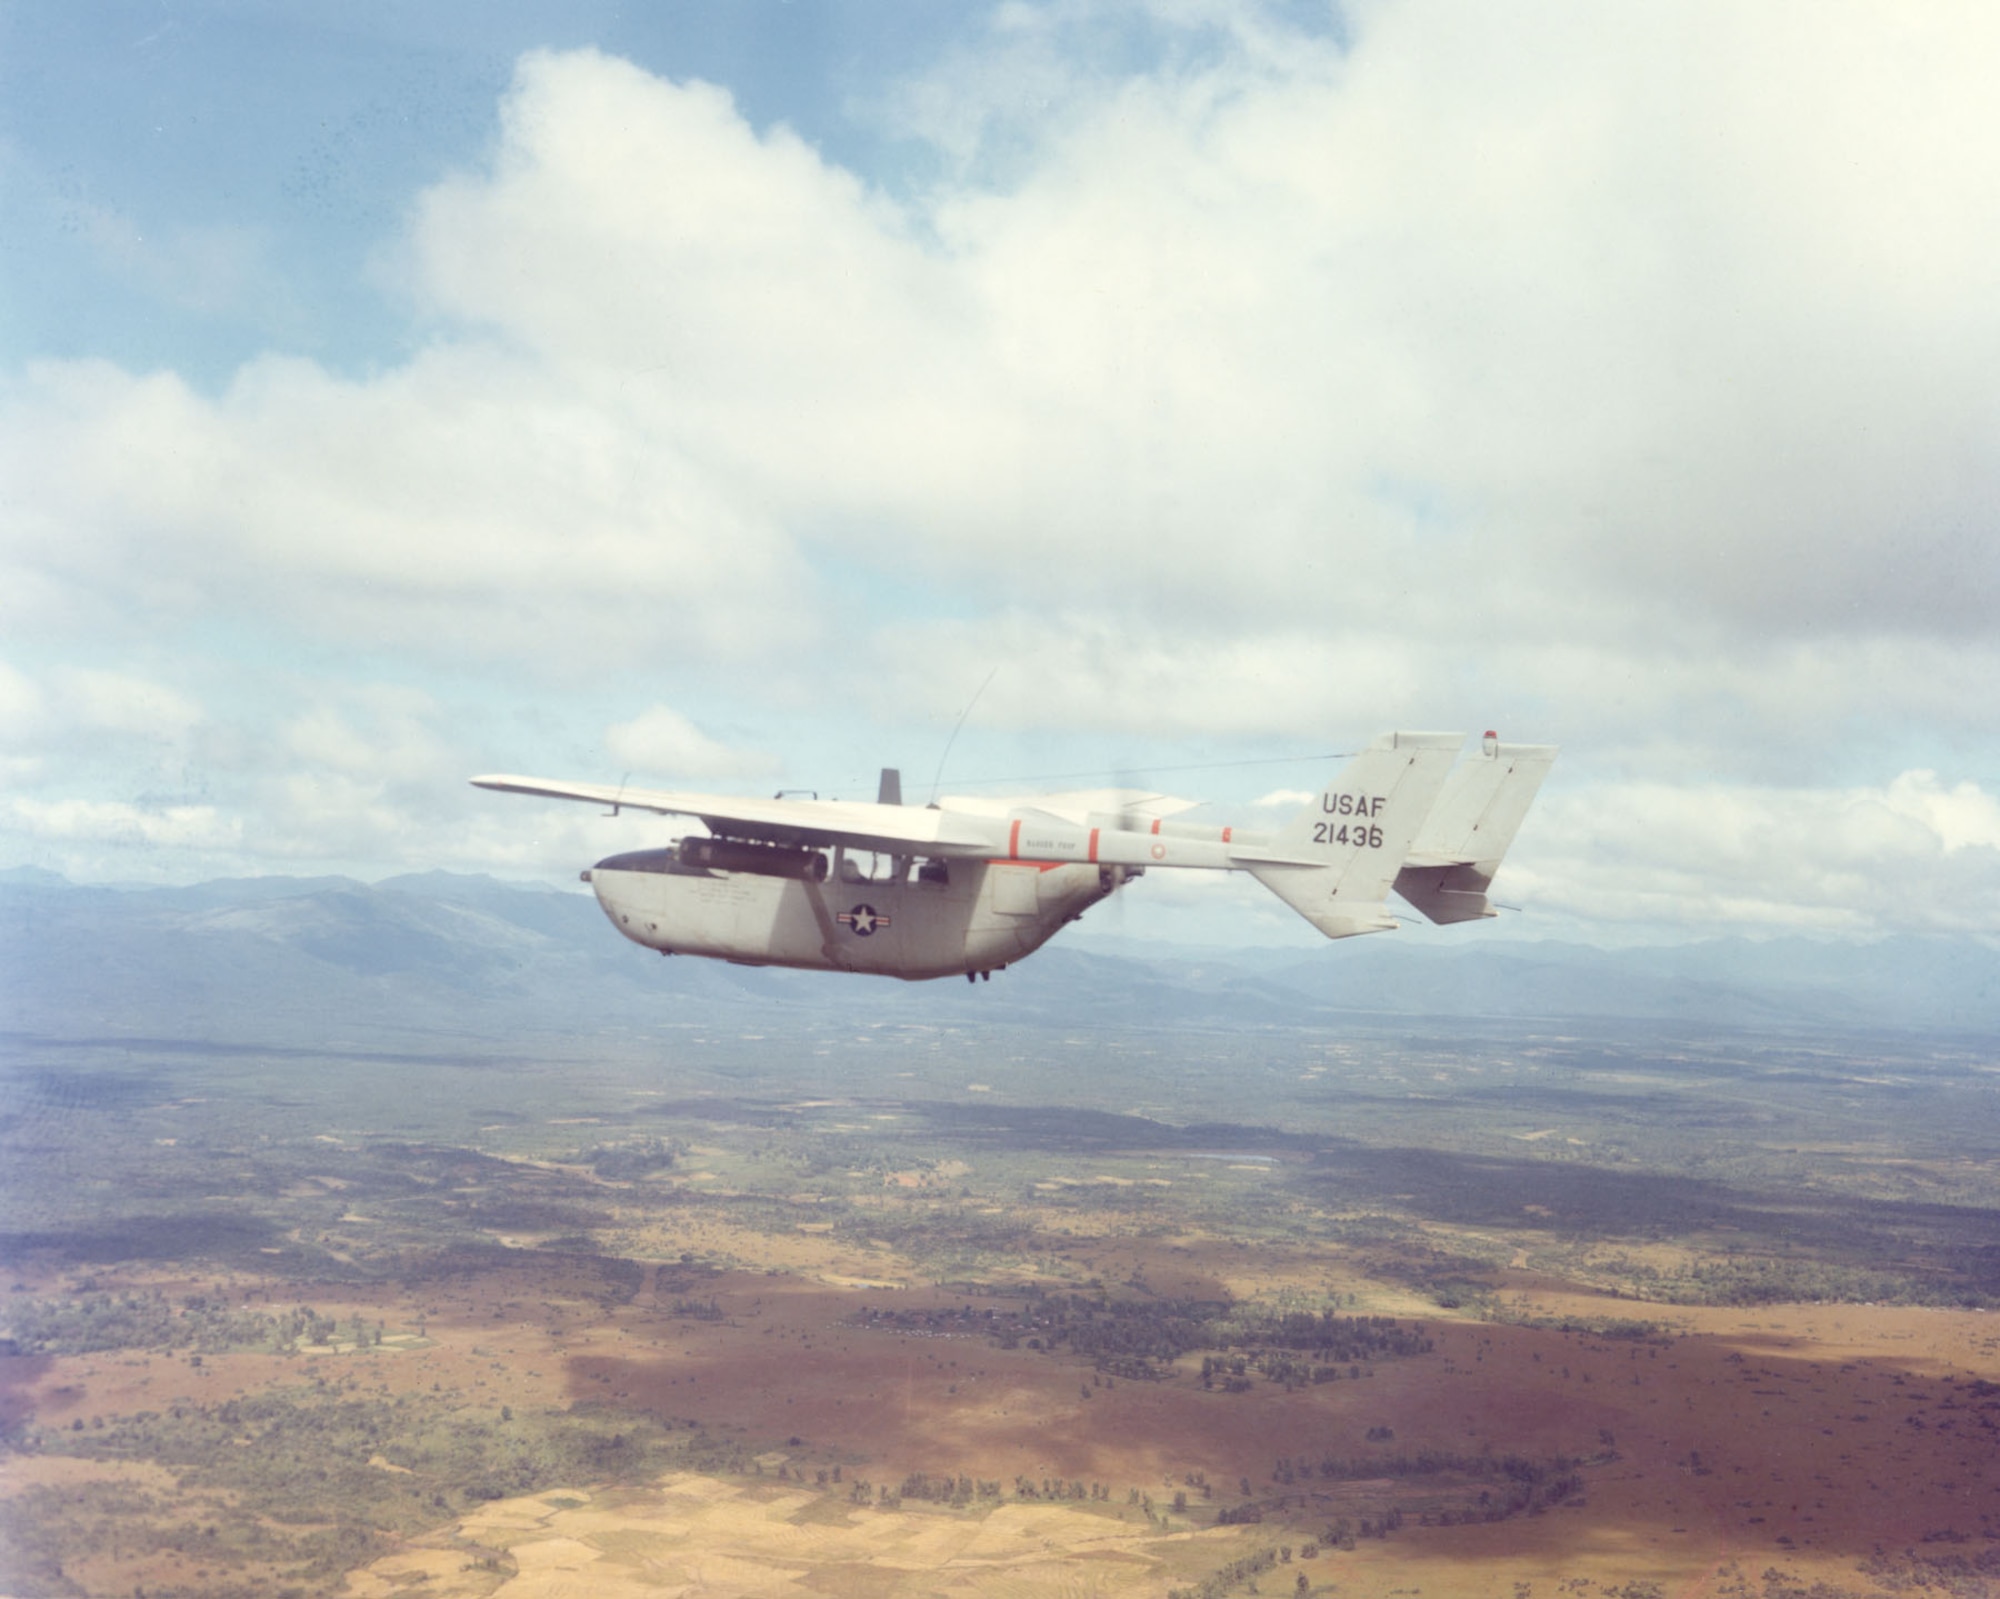 O-2A in flight near Pleiku in 1968. Faster than the O-1 Bird Dog, the O-2A could respond to calls for air support more quickly and could stay over the target longer. (U.S. Air Force photo)